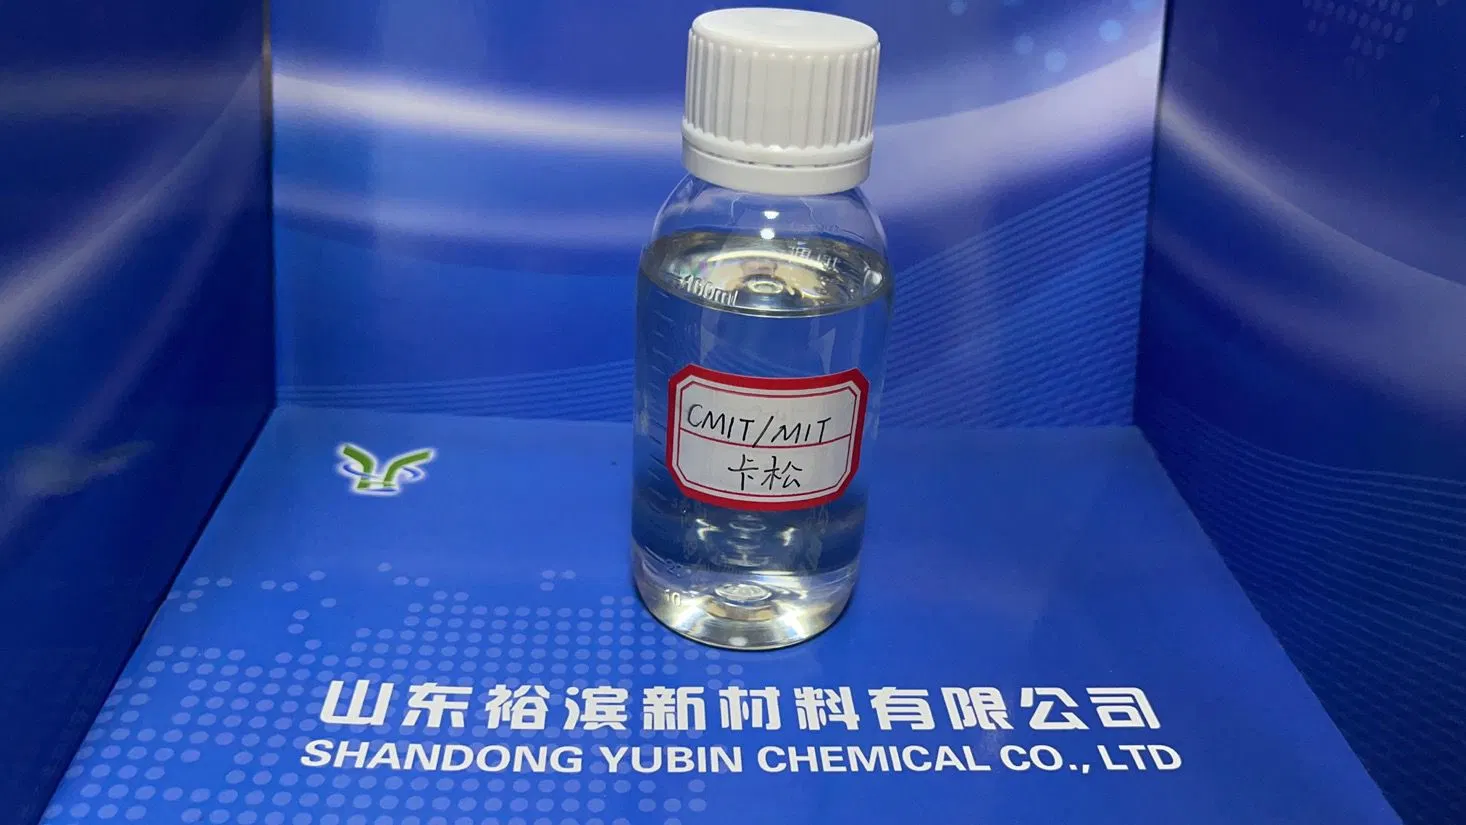 Cmit/Mit 14% Water Treatment Chemical Biocides